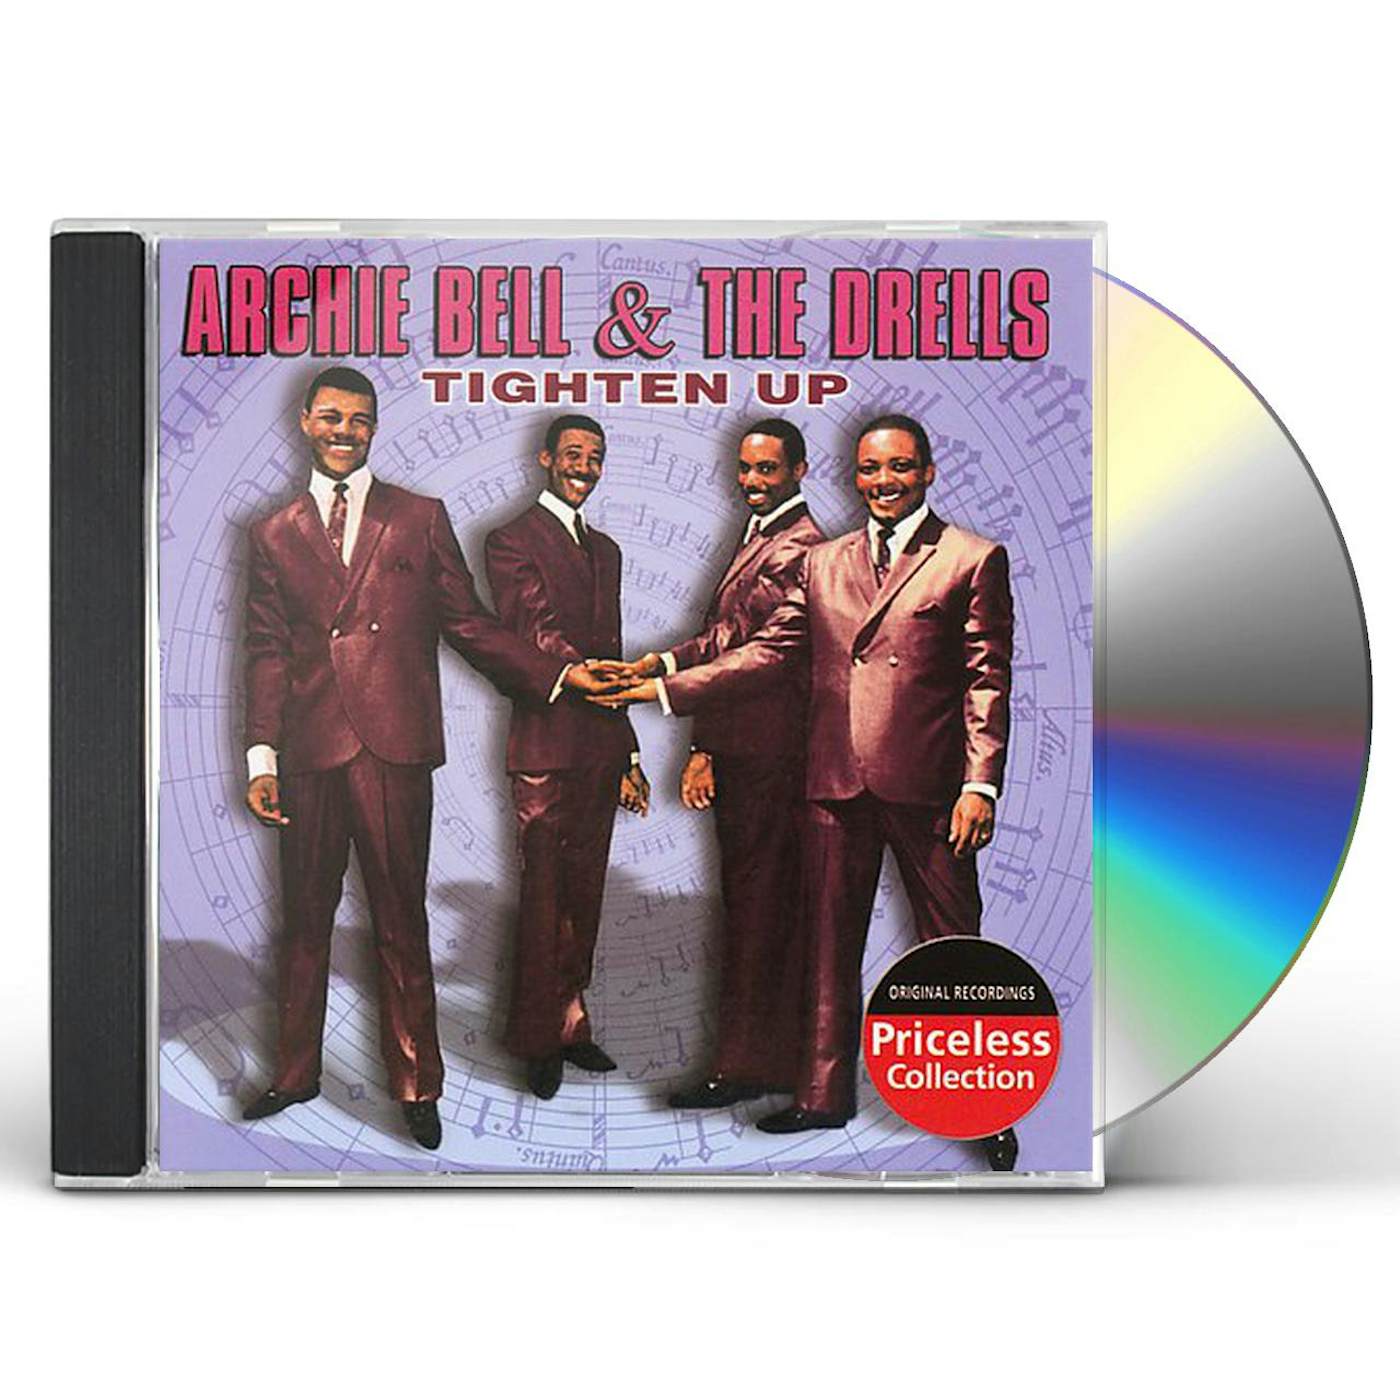 Archie Bell & The Drells TIGHTEN UP CD